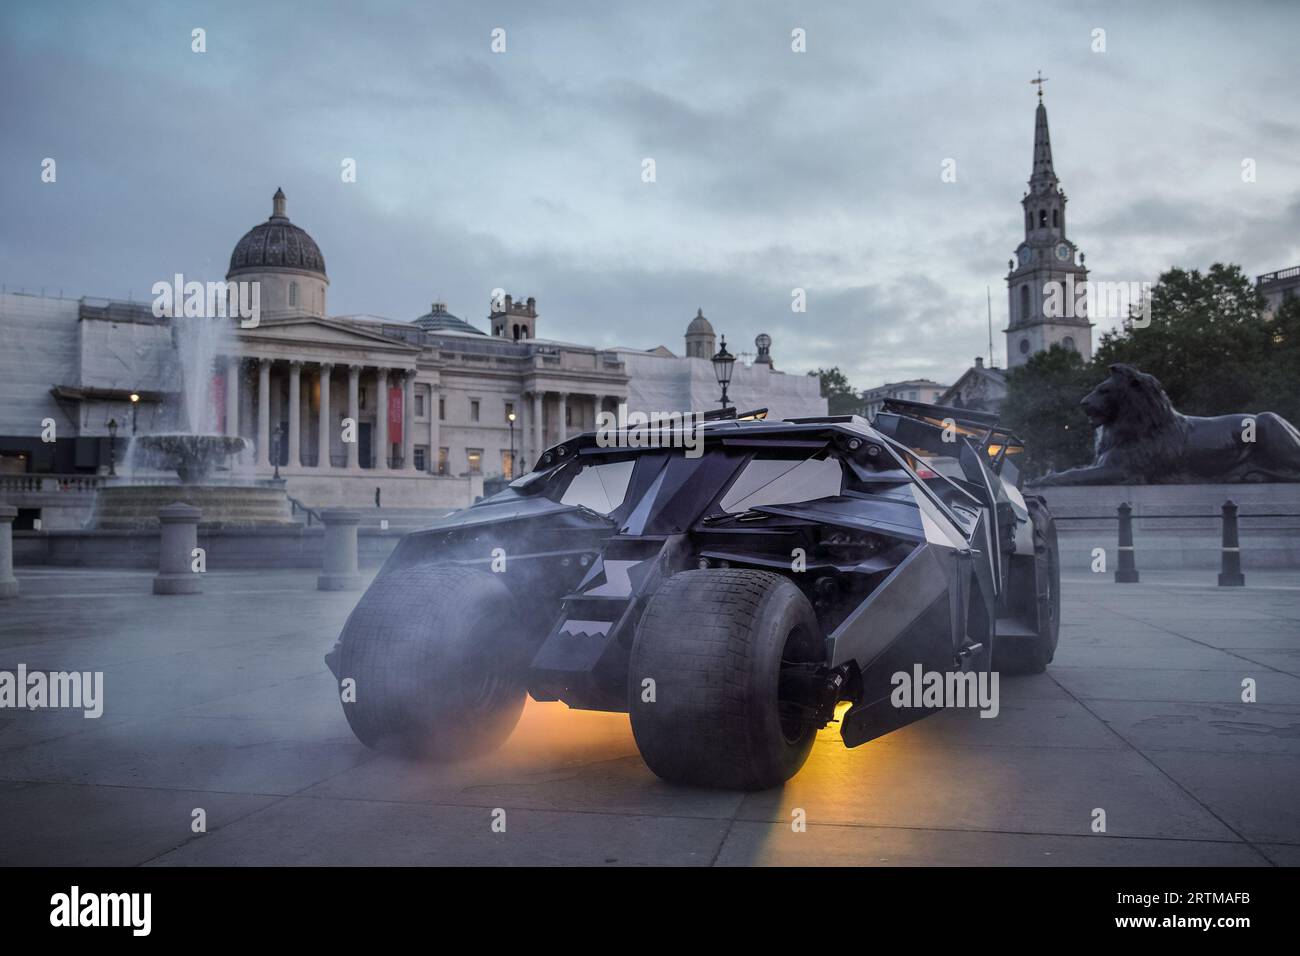 London, UK. 14th September 2023. Global Batman day sees the actual Batmobile Tumbler featured in The Dark Knight Trilogy of movies parked up in Trafalgar Square ahead of annual Batman Day celebrations on 16th September. Credit: Guy Corbishley/Alamy Live News Stock Photo